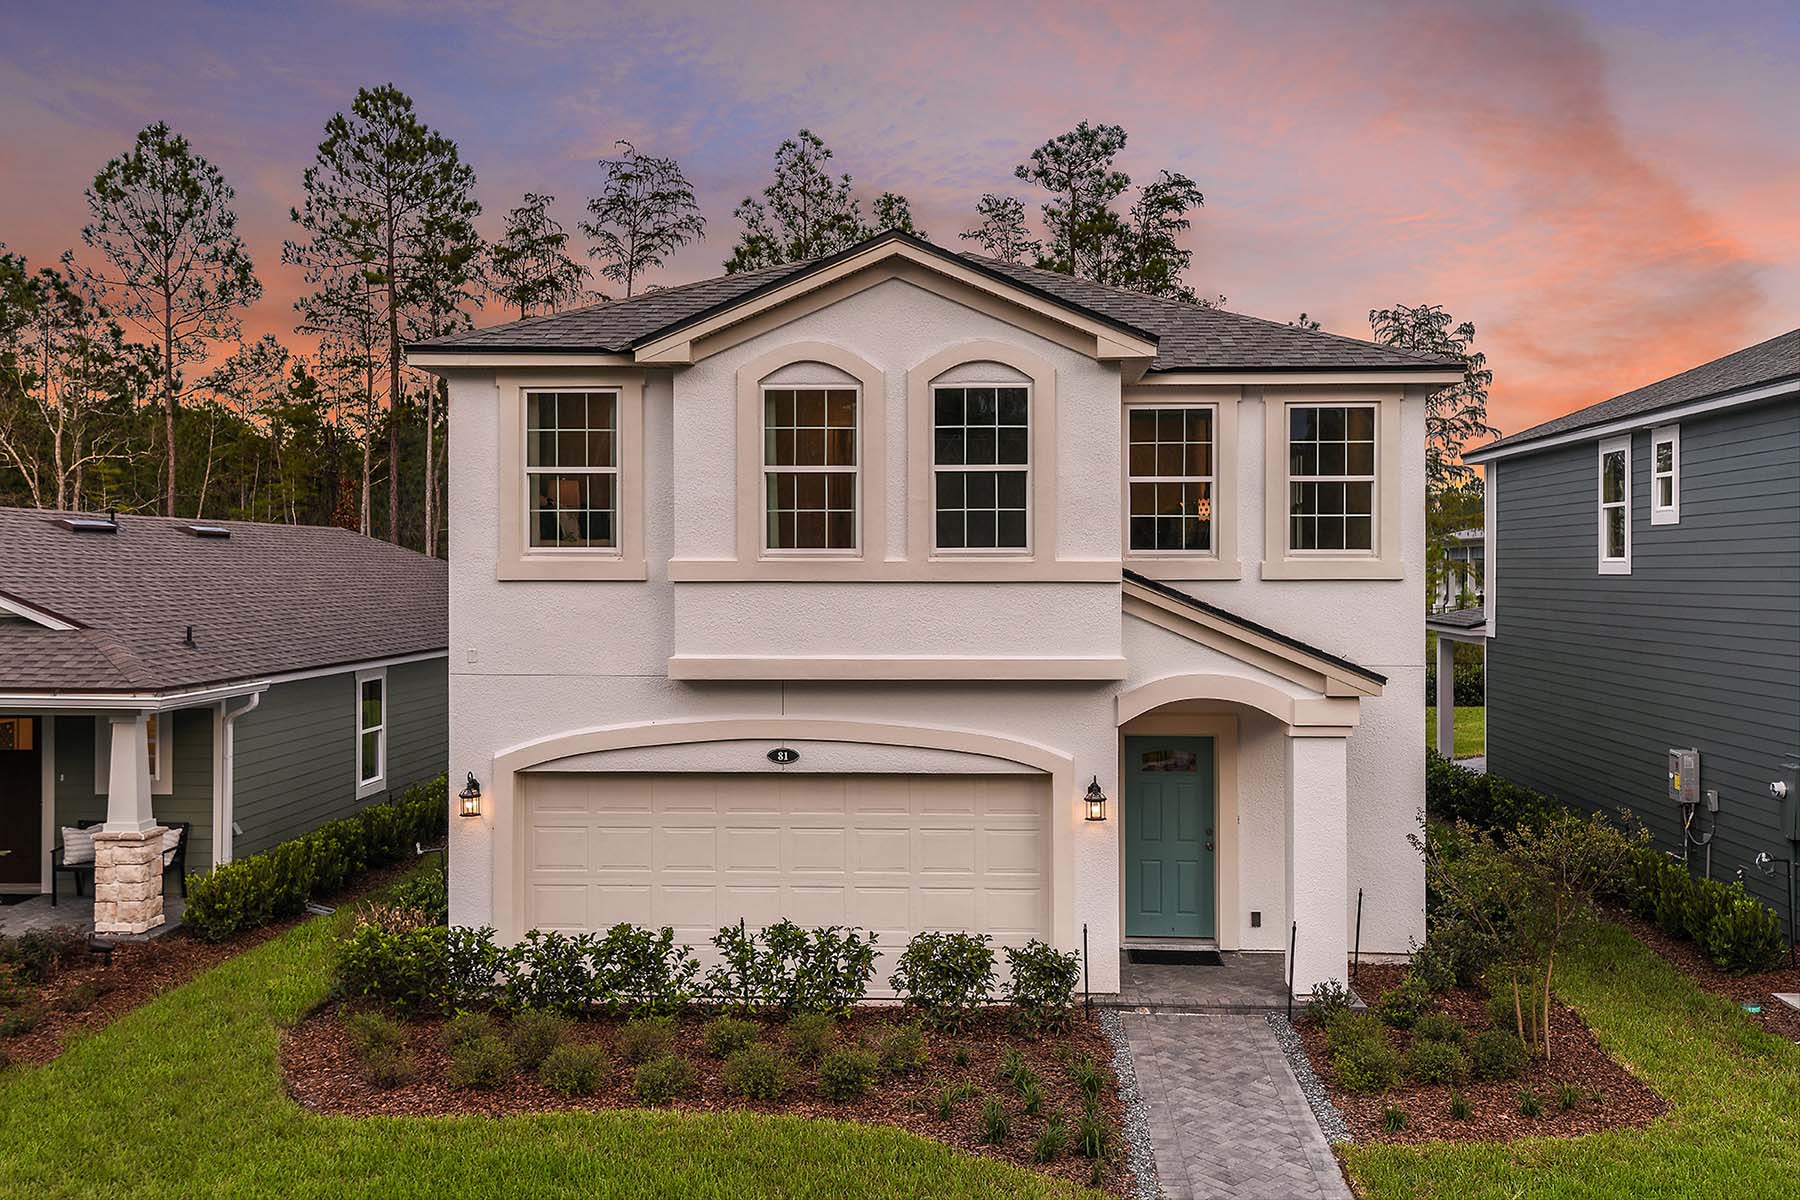 Two-story home in Rivertown community in St. Johns County, Florida